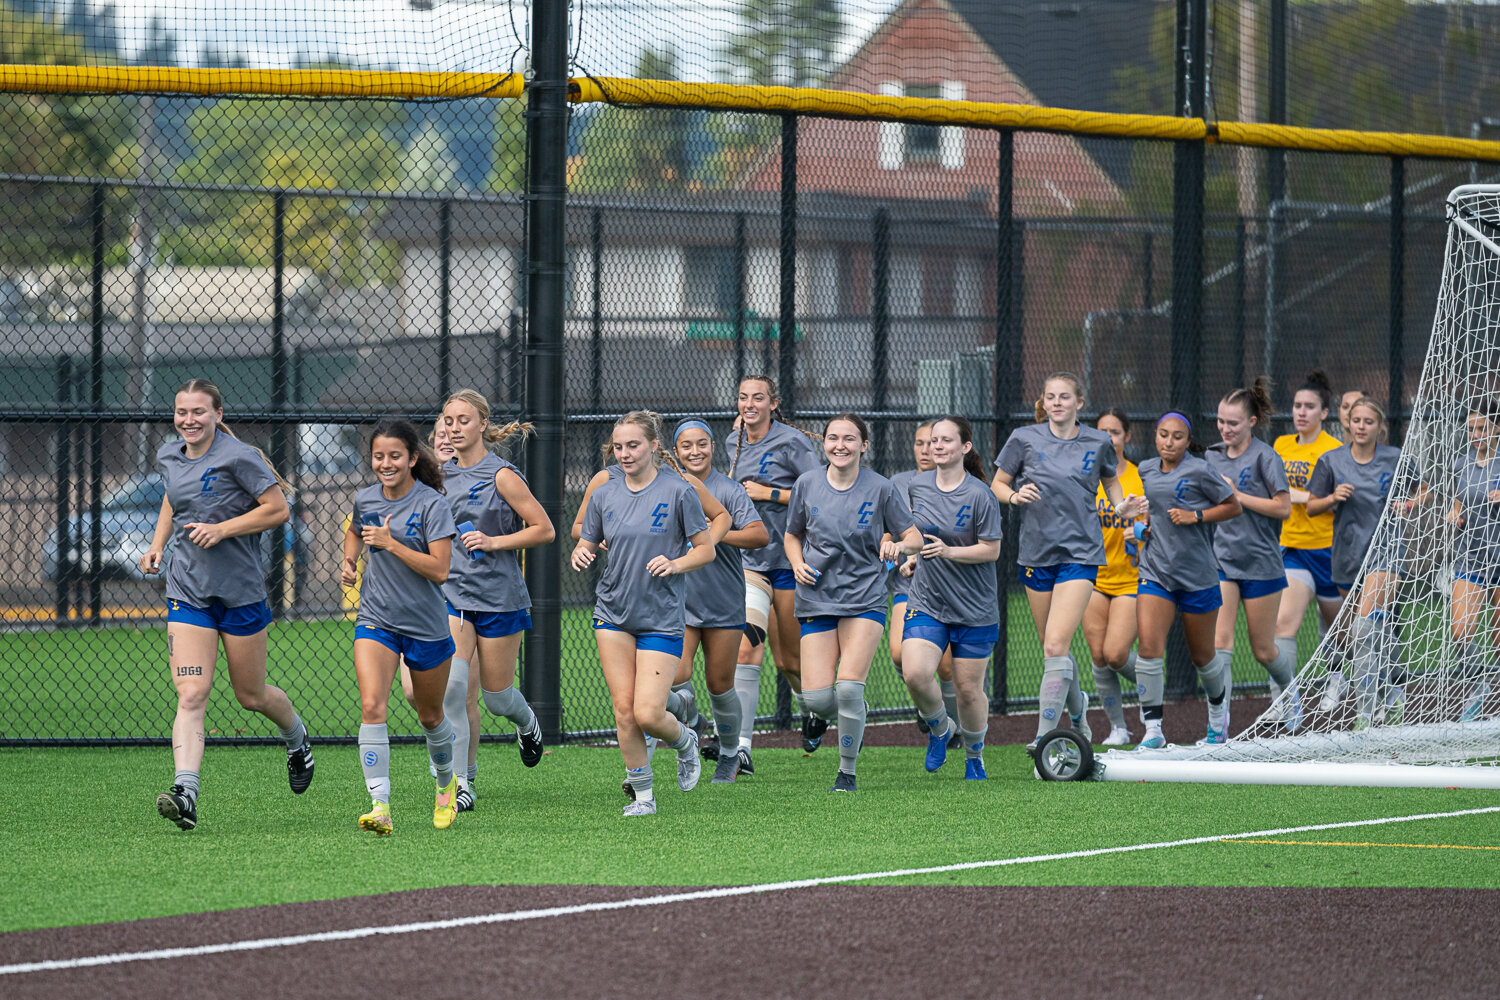 The Centralia College women's soccer team goes on a run before practice on Monday, Aug. 7,